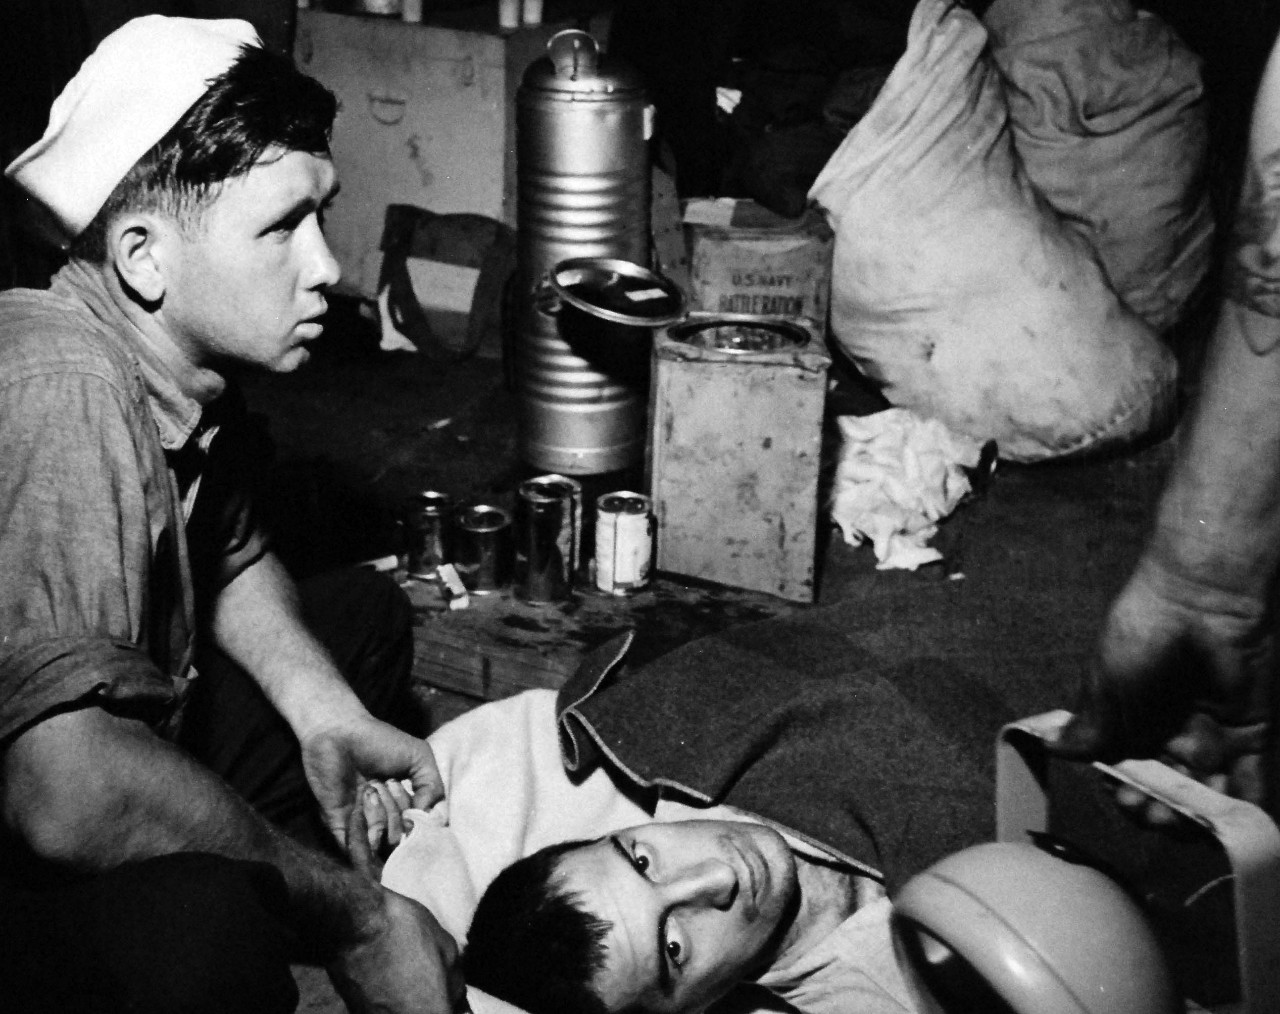 80-G-490458:   Allied Prisoners of War, 1945.   Allied prisoners of war suffering from malnutrition and other disorders as seen after their rescue from the Omori camp, Tokyo area, by a U.S. Navy rescue mission headed by Commander Roger Simpson and Commander Harold Stassen.  Treatment of prisoners was described as inquisitional form of barbarism.  Shown is an Allied prisoner of war too emaciated to walk and is carried on board a small craft to be transported to a U.S. Navy hospital ship in Tokyo Bay, August 30, 1945.  Emergency medical and food supplies can be seen at the left.   Official U.S. Navy photograph, now in the collections of the National Archives.  (2014/05/29).    The original is a small photograph.   